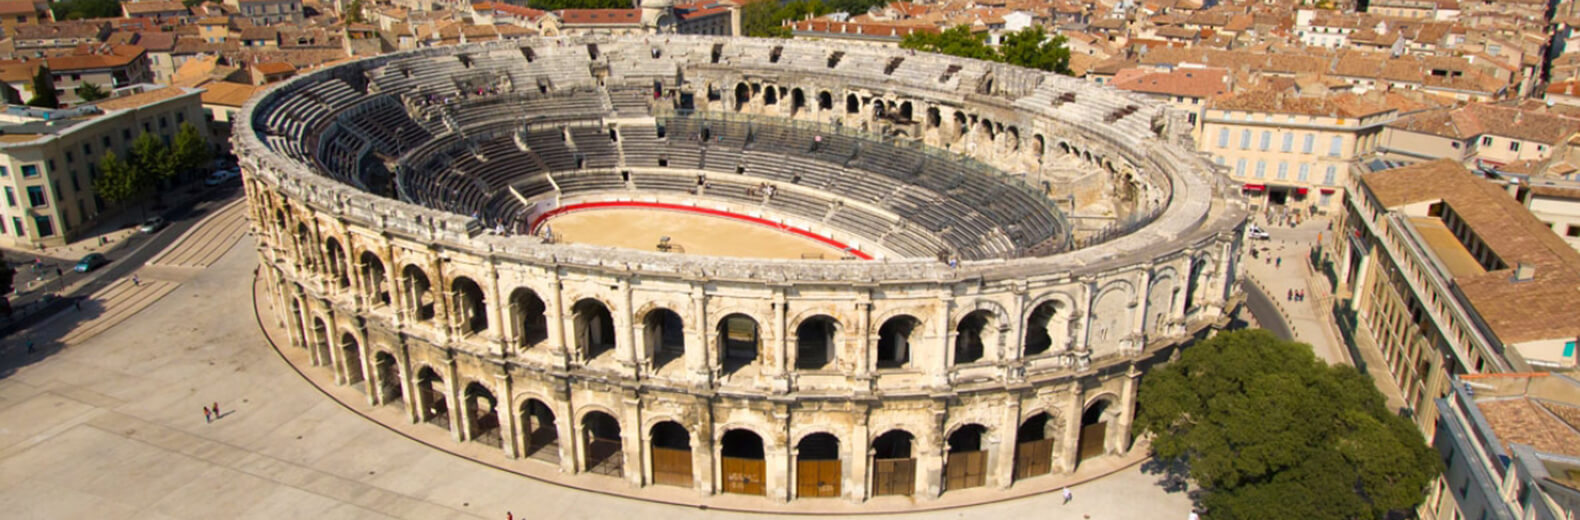 The arenas of Nimes